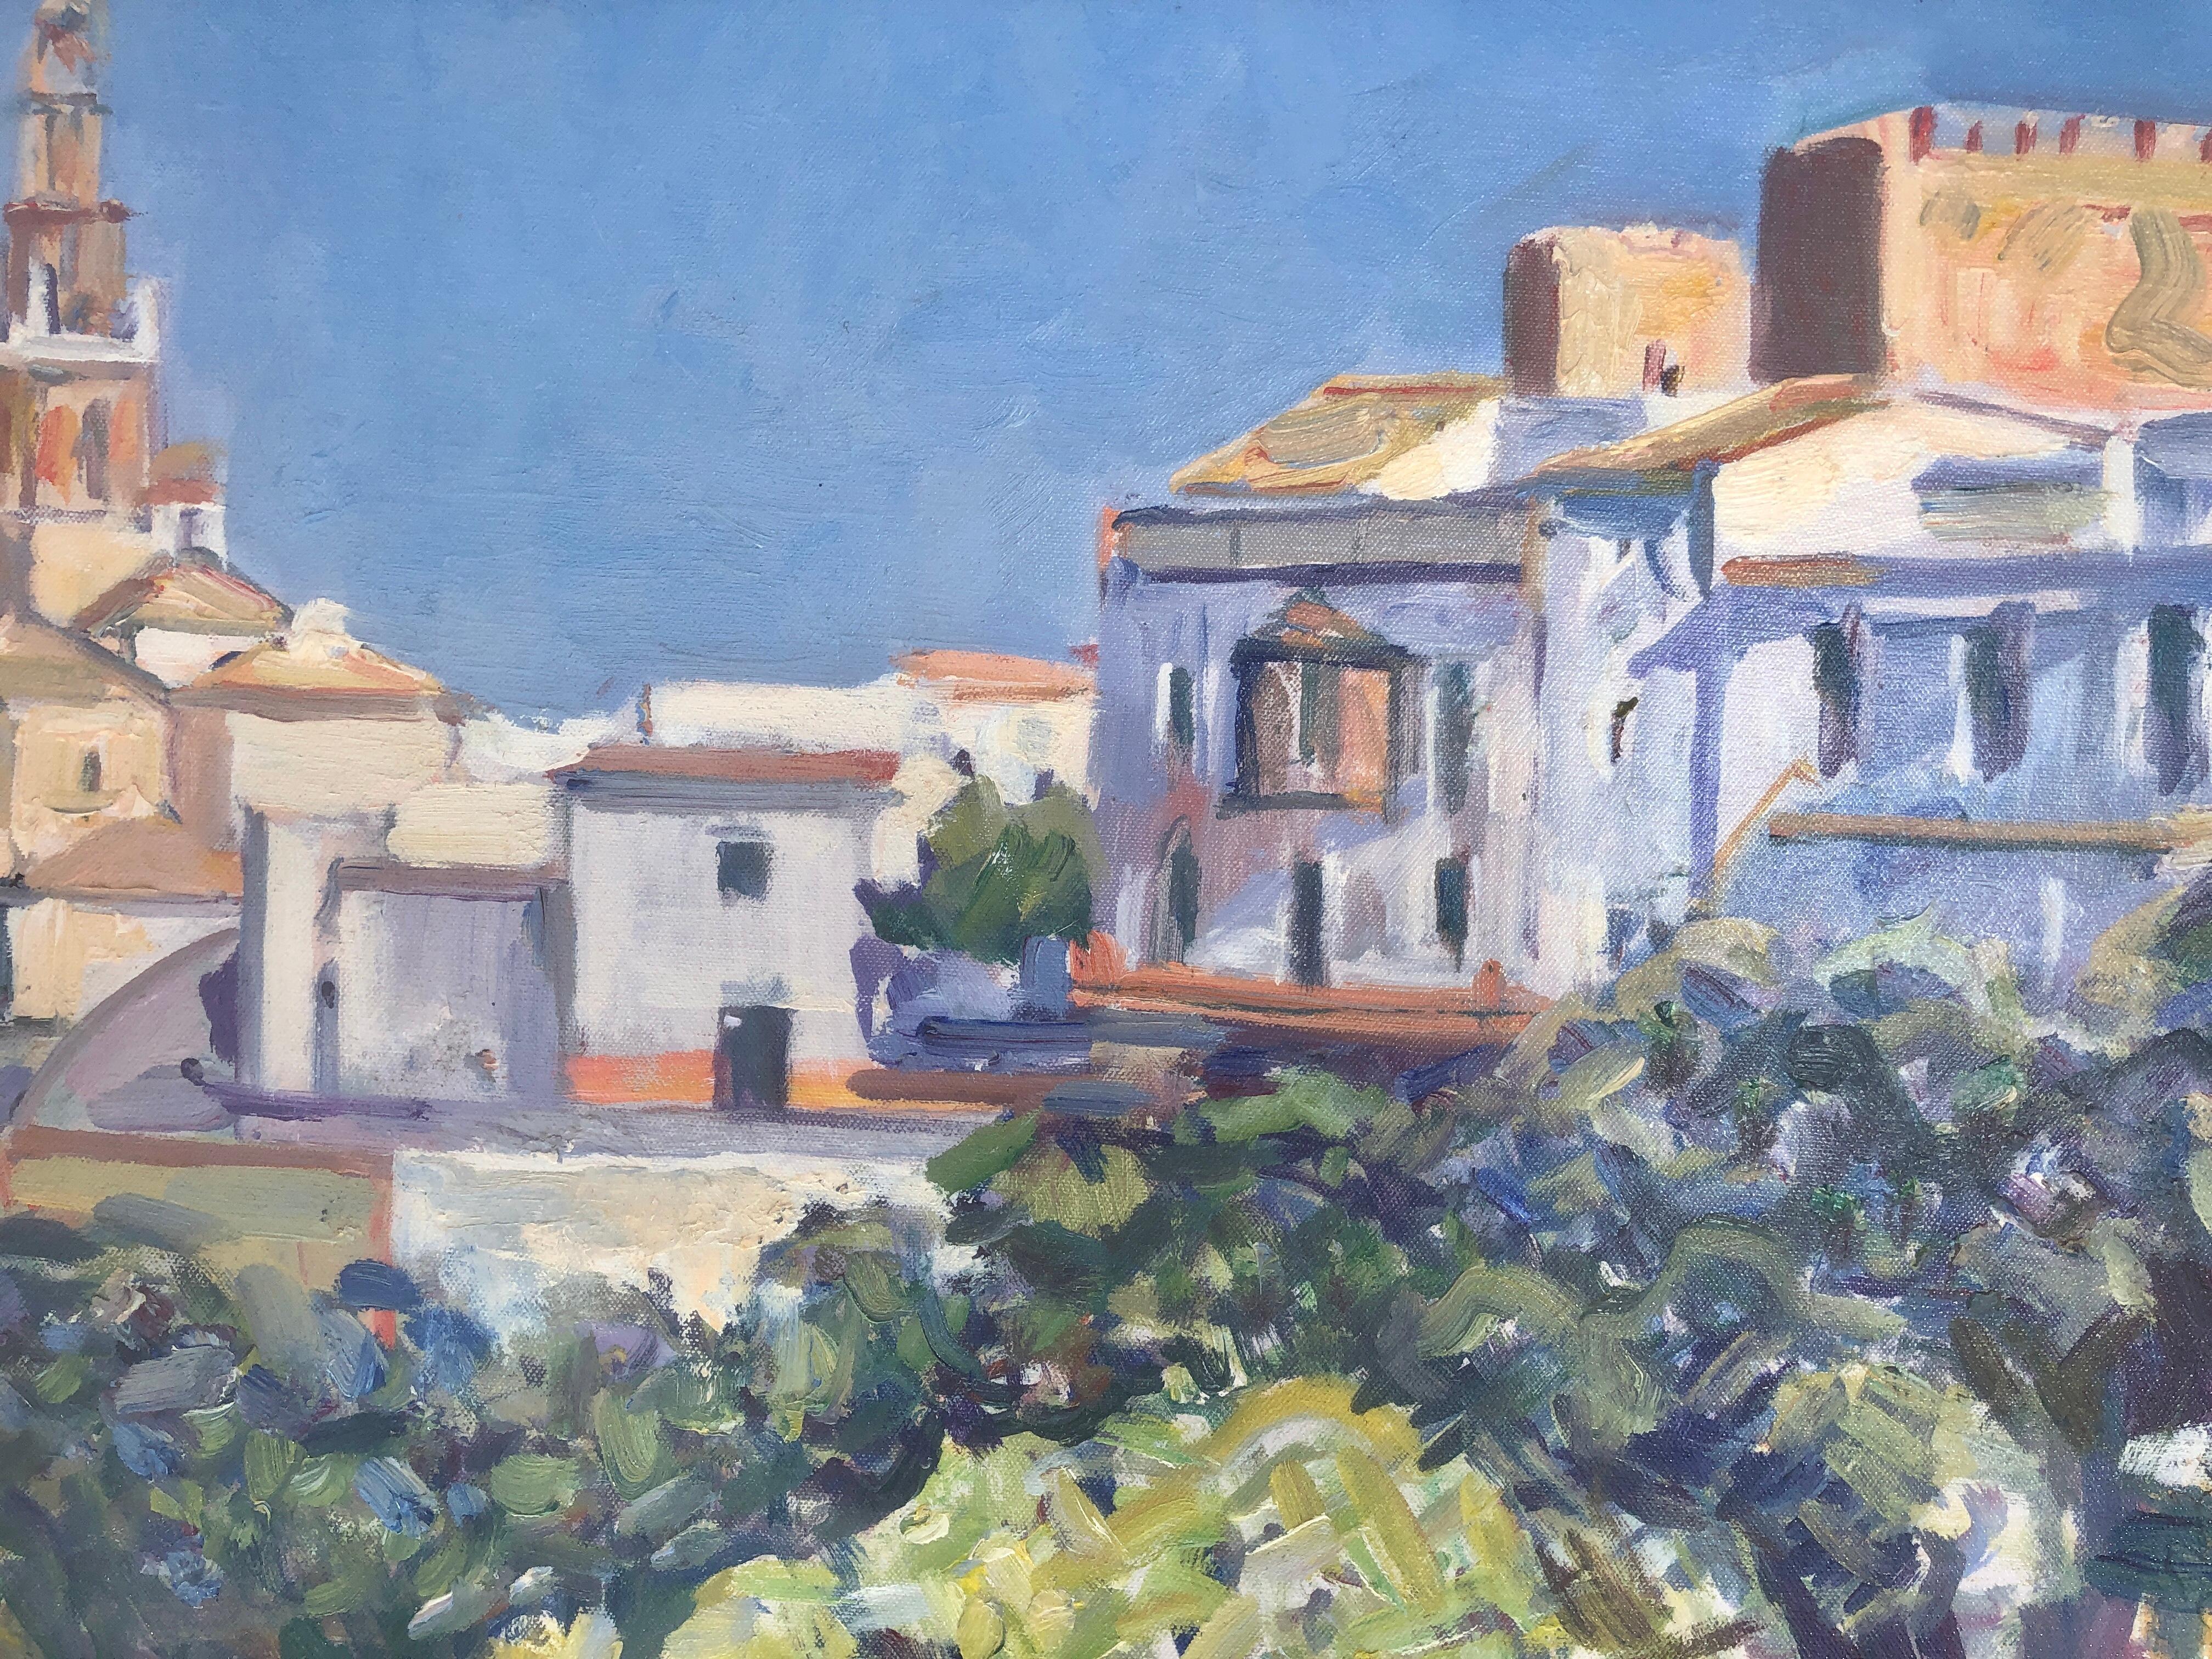 Carmona Andalucia Spain oil painting spanish landscape - Post-Impressionist Painting by Rafael Duran Benet